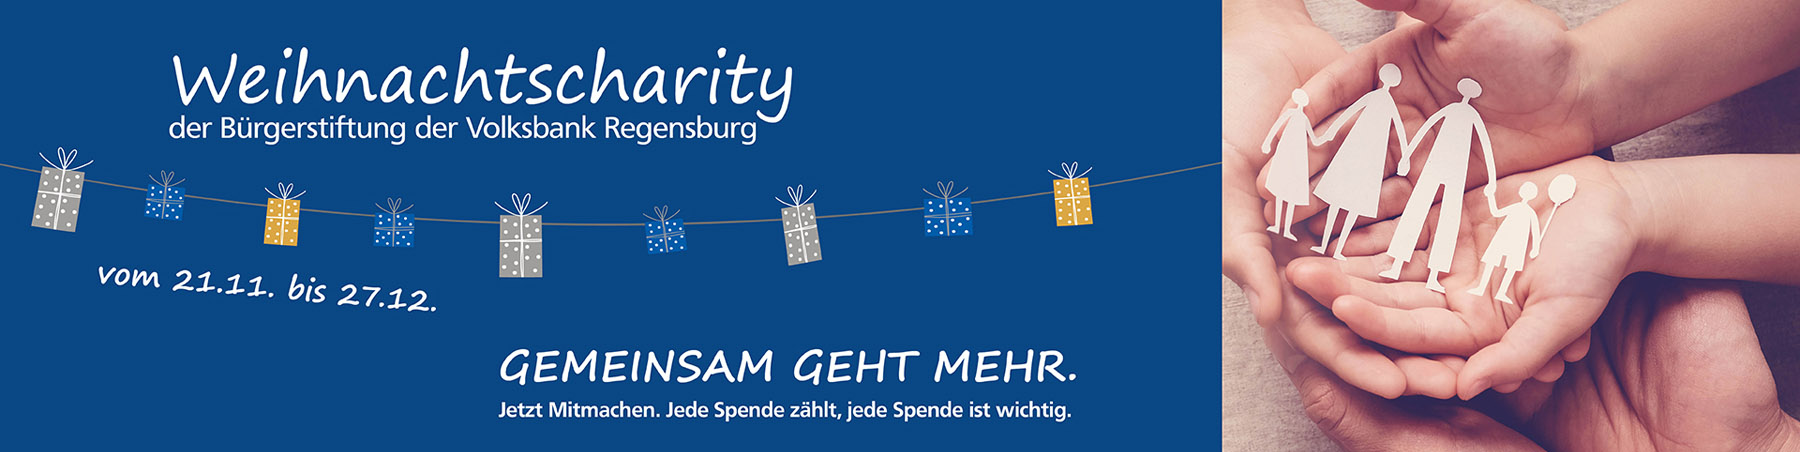 Weihnachts-Charity